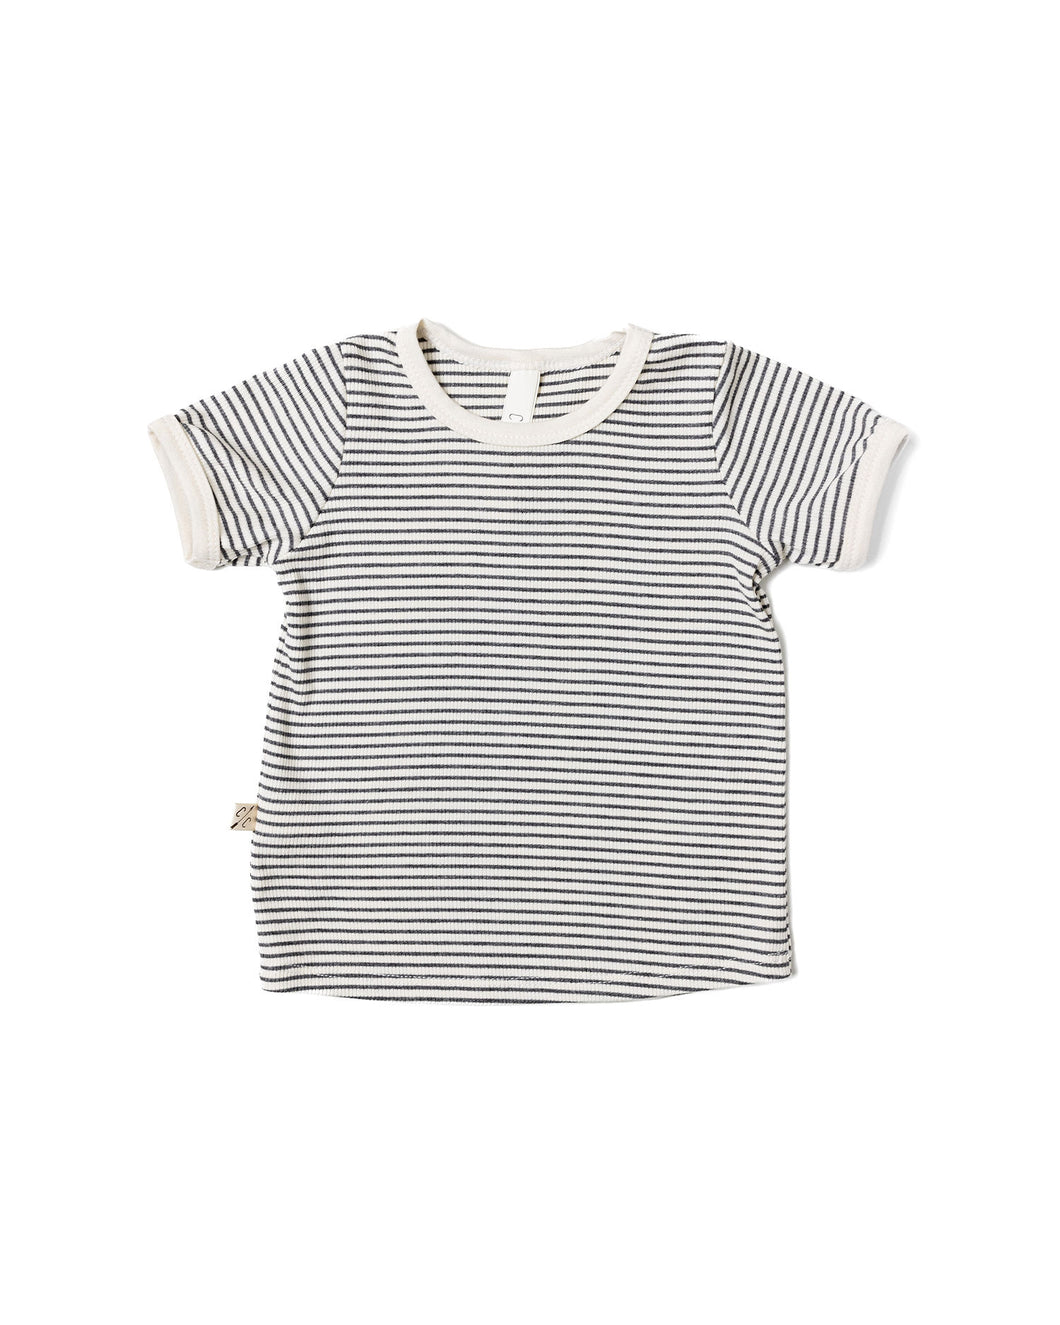 rib knit tee - narrow charcoal stripe with contrast